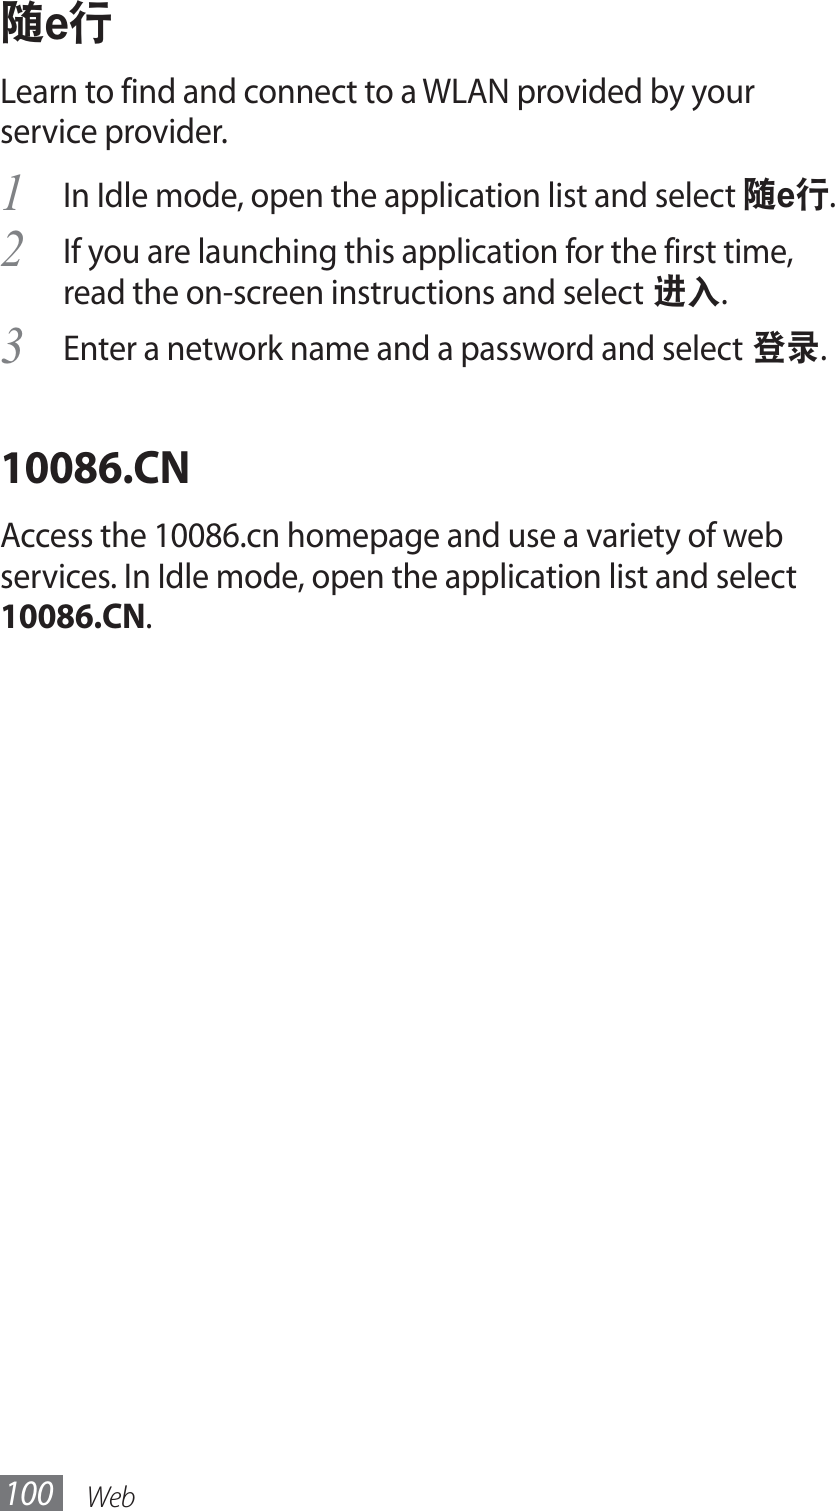 Web100ཱུeᄵLearn to find and connect to a WLAN provided by your service provider.In Idle mode, open the application list and select 1 ཱུeᄵ.If you are launching this application for the first time, 2 read the on-screen instructions and select ੣๠.Enter a network name and a password and select3  ݂௽.10086.CNAccess the 10086.cn homepage and use a variety of web services. In Idle mode, open the application list and select 10086.CN.